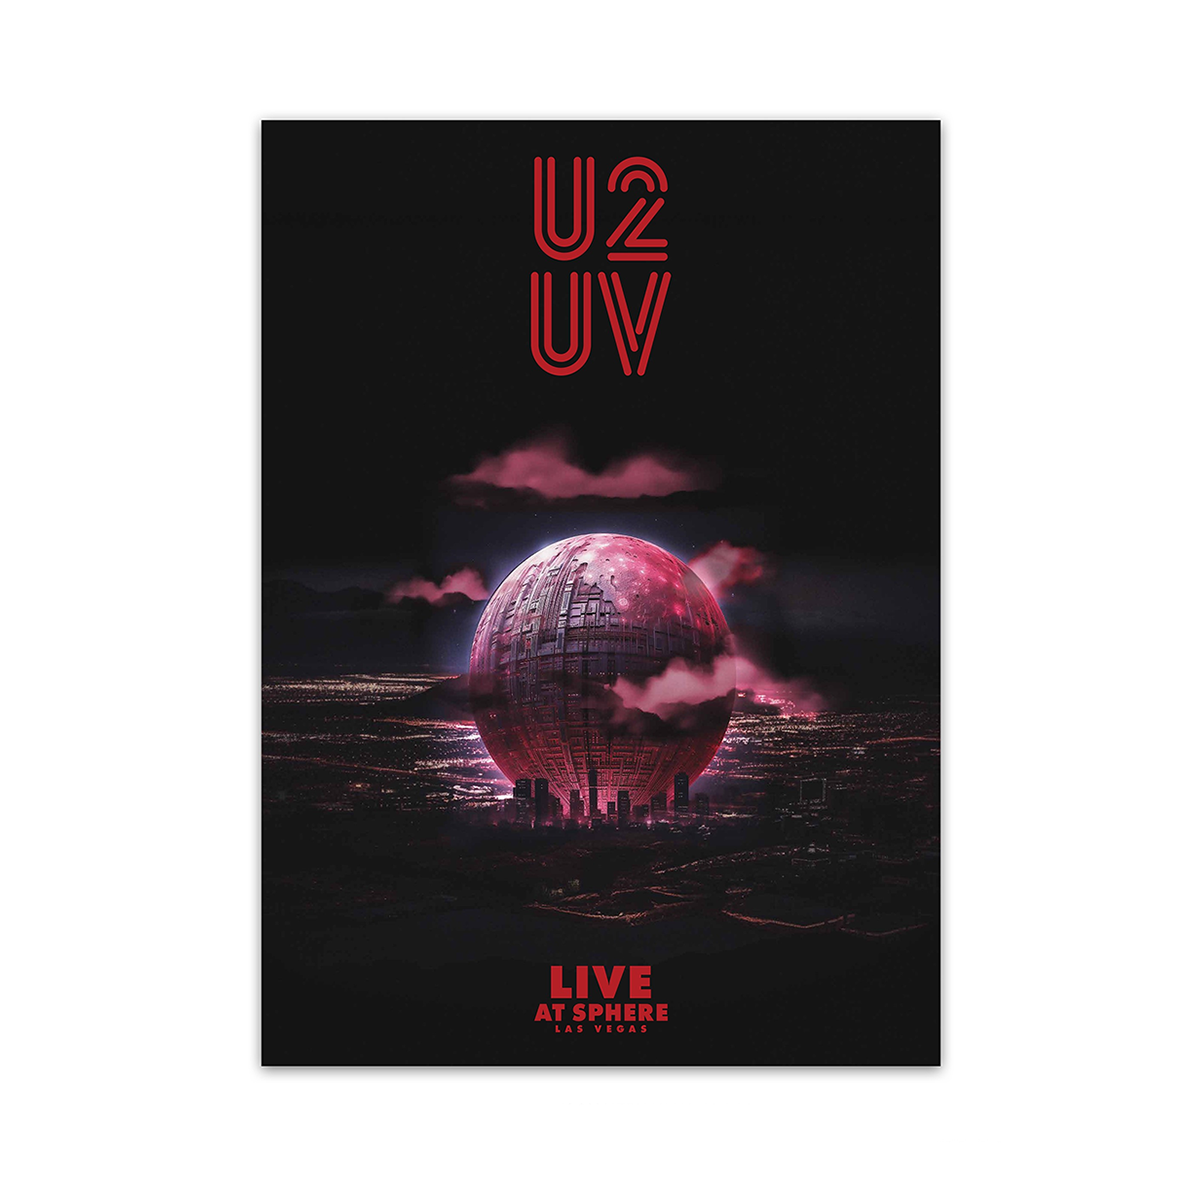 U2 UV Live At Sphere Dome Poster